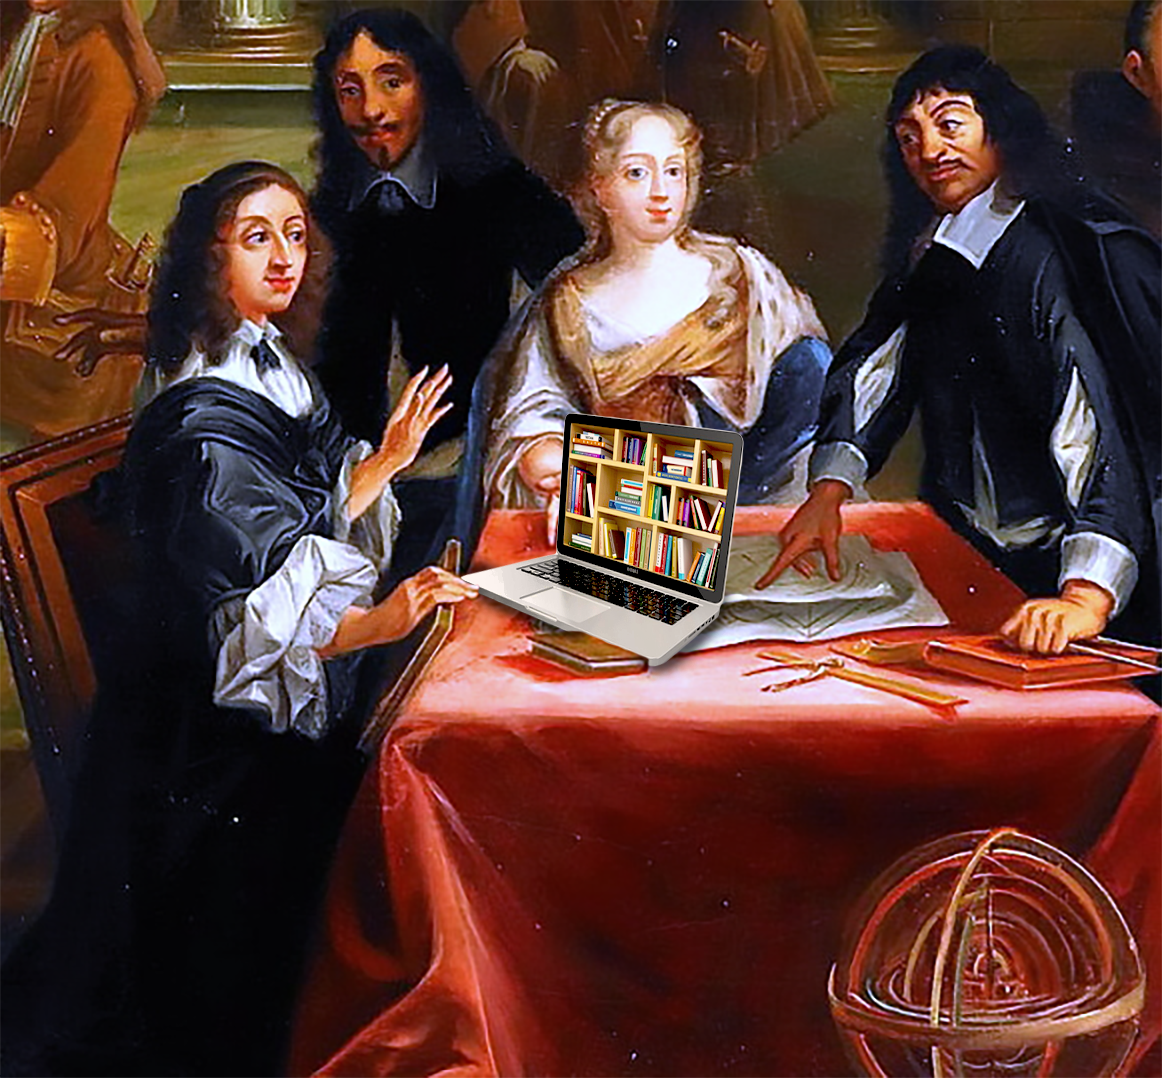 Painting of René Descartes and Christina of Sweden, with a laptop edited in